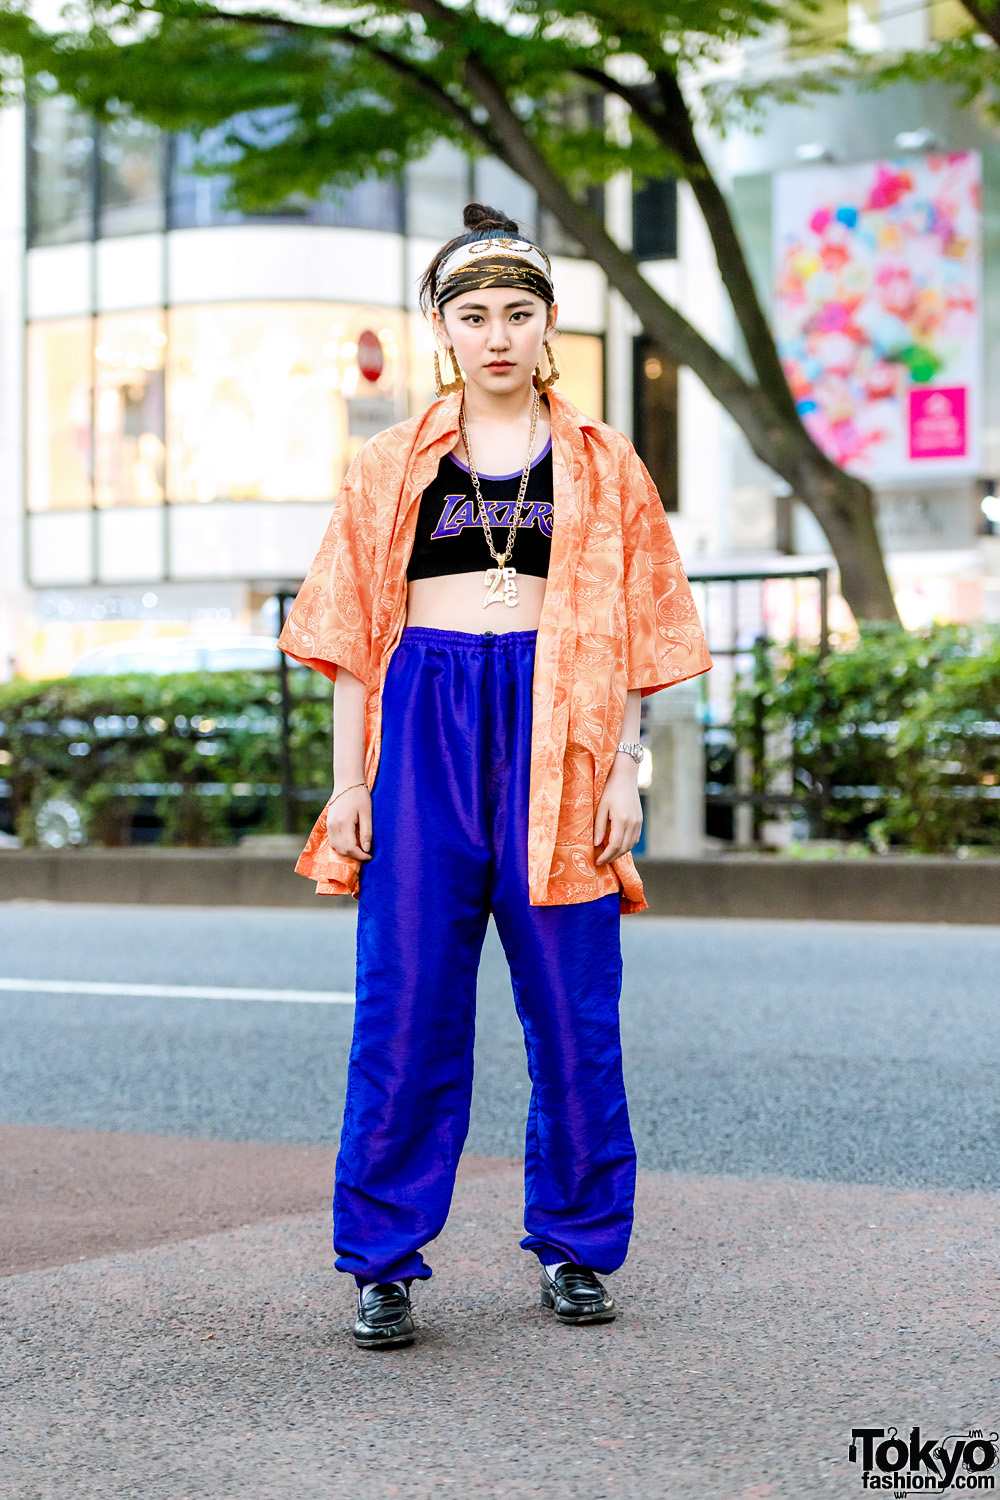 Japanese Resale Street Style w/ Paisley Print Shirt, Lakers Cropped Top, Drawstring Pants, Loafers & Headscarf